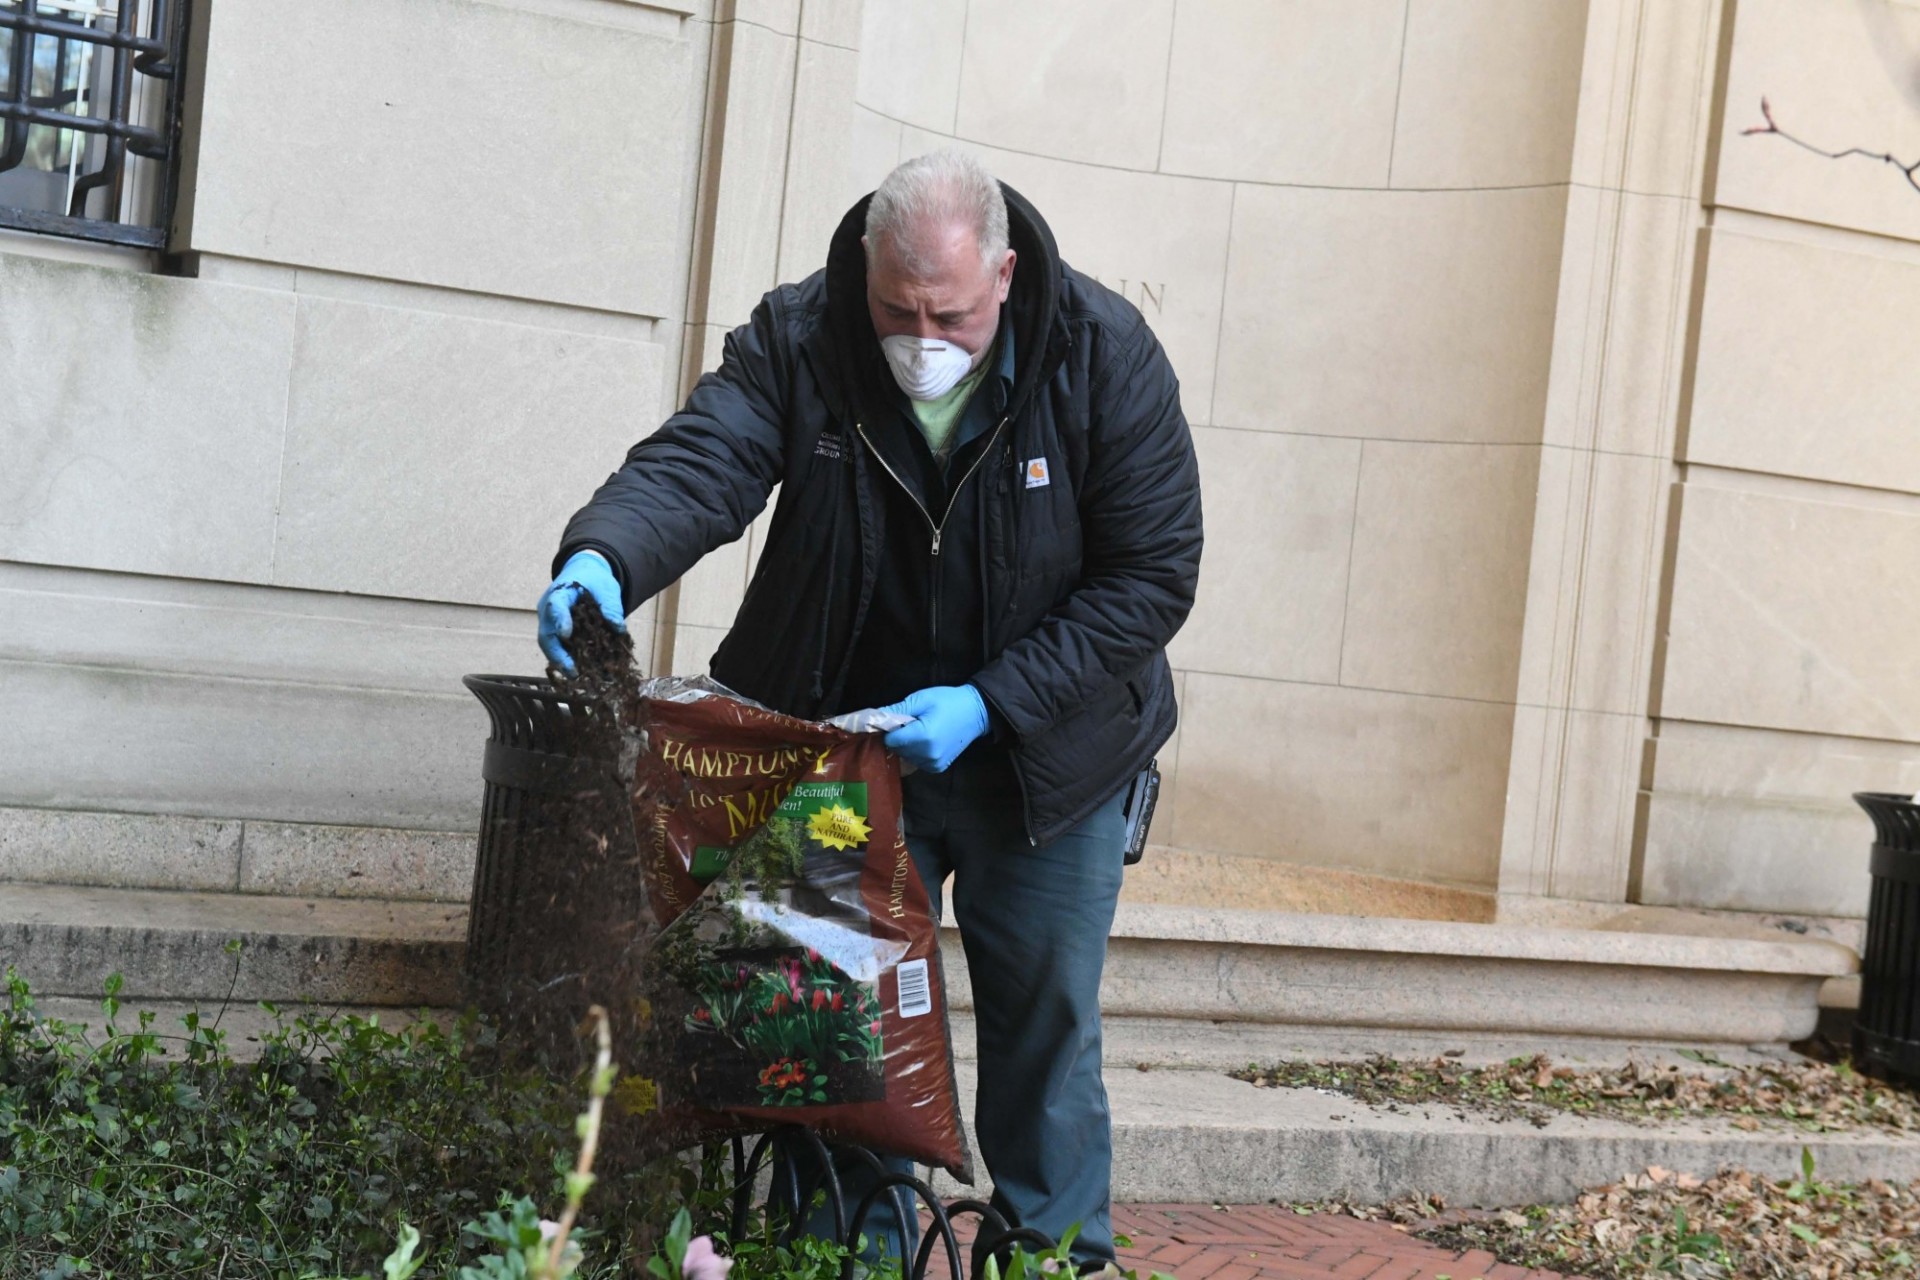 A mam wearing a mask and a black jacket over a green Grounds uniform is spreading plant fertilizer on a garden.